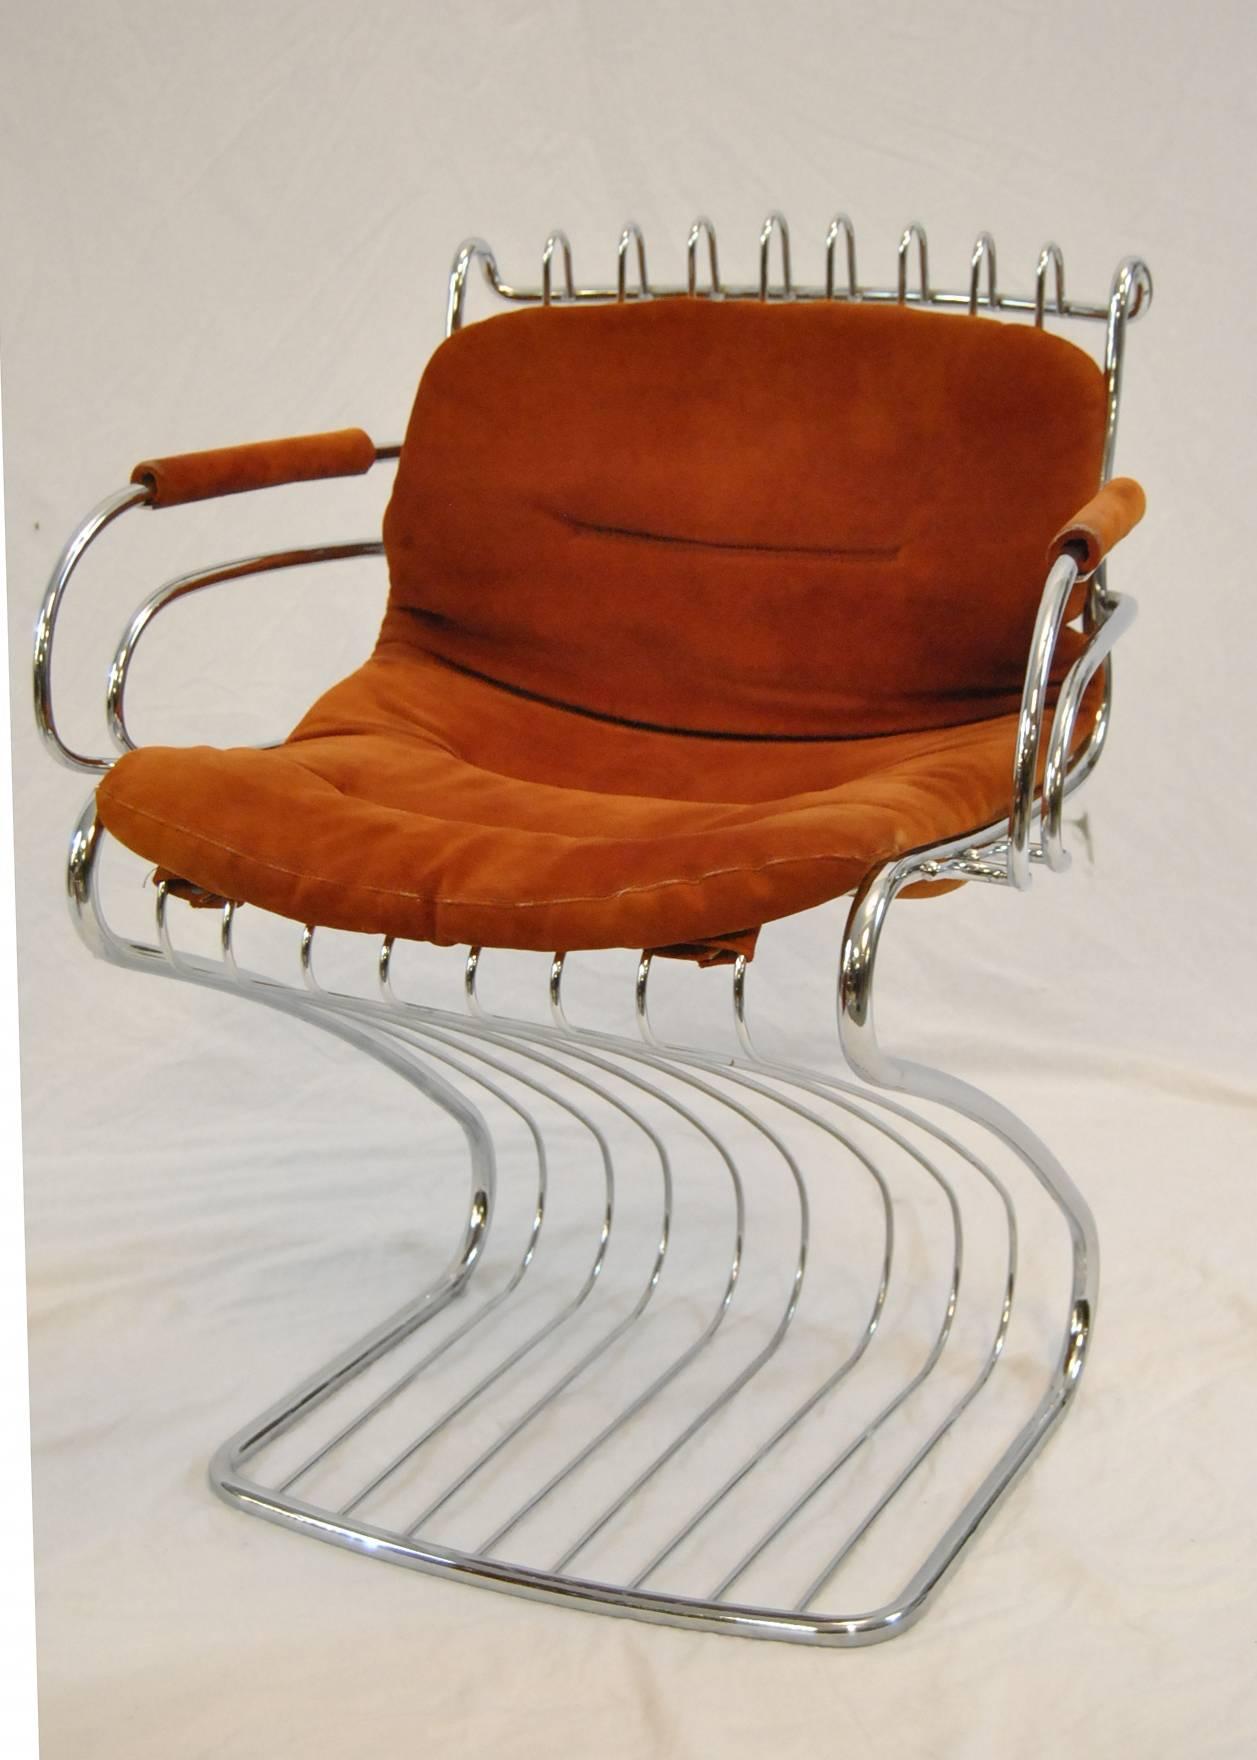 A great set of Mid-Century Modern chrome wire chairs designed by Gastone Rinaldi for RIMA of Italy. The set includes six dining chairs, two (2) arm and four (4) side chairs. The chairs are constructed of chromed steel tubing with sculpted wire seats